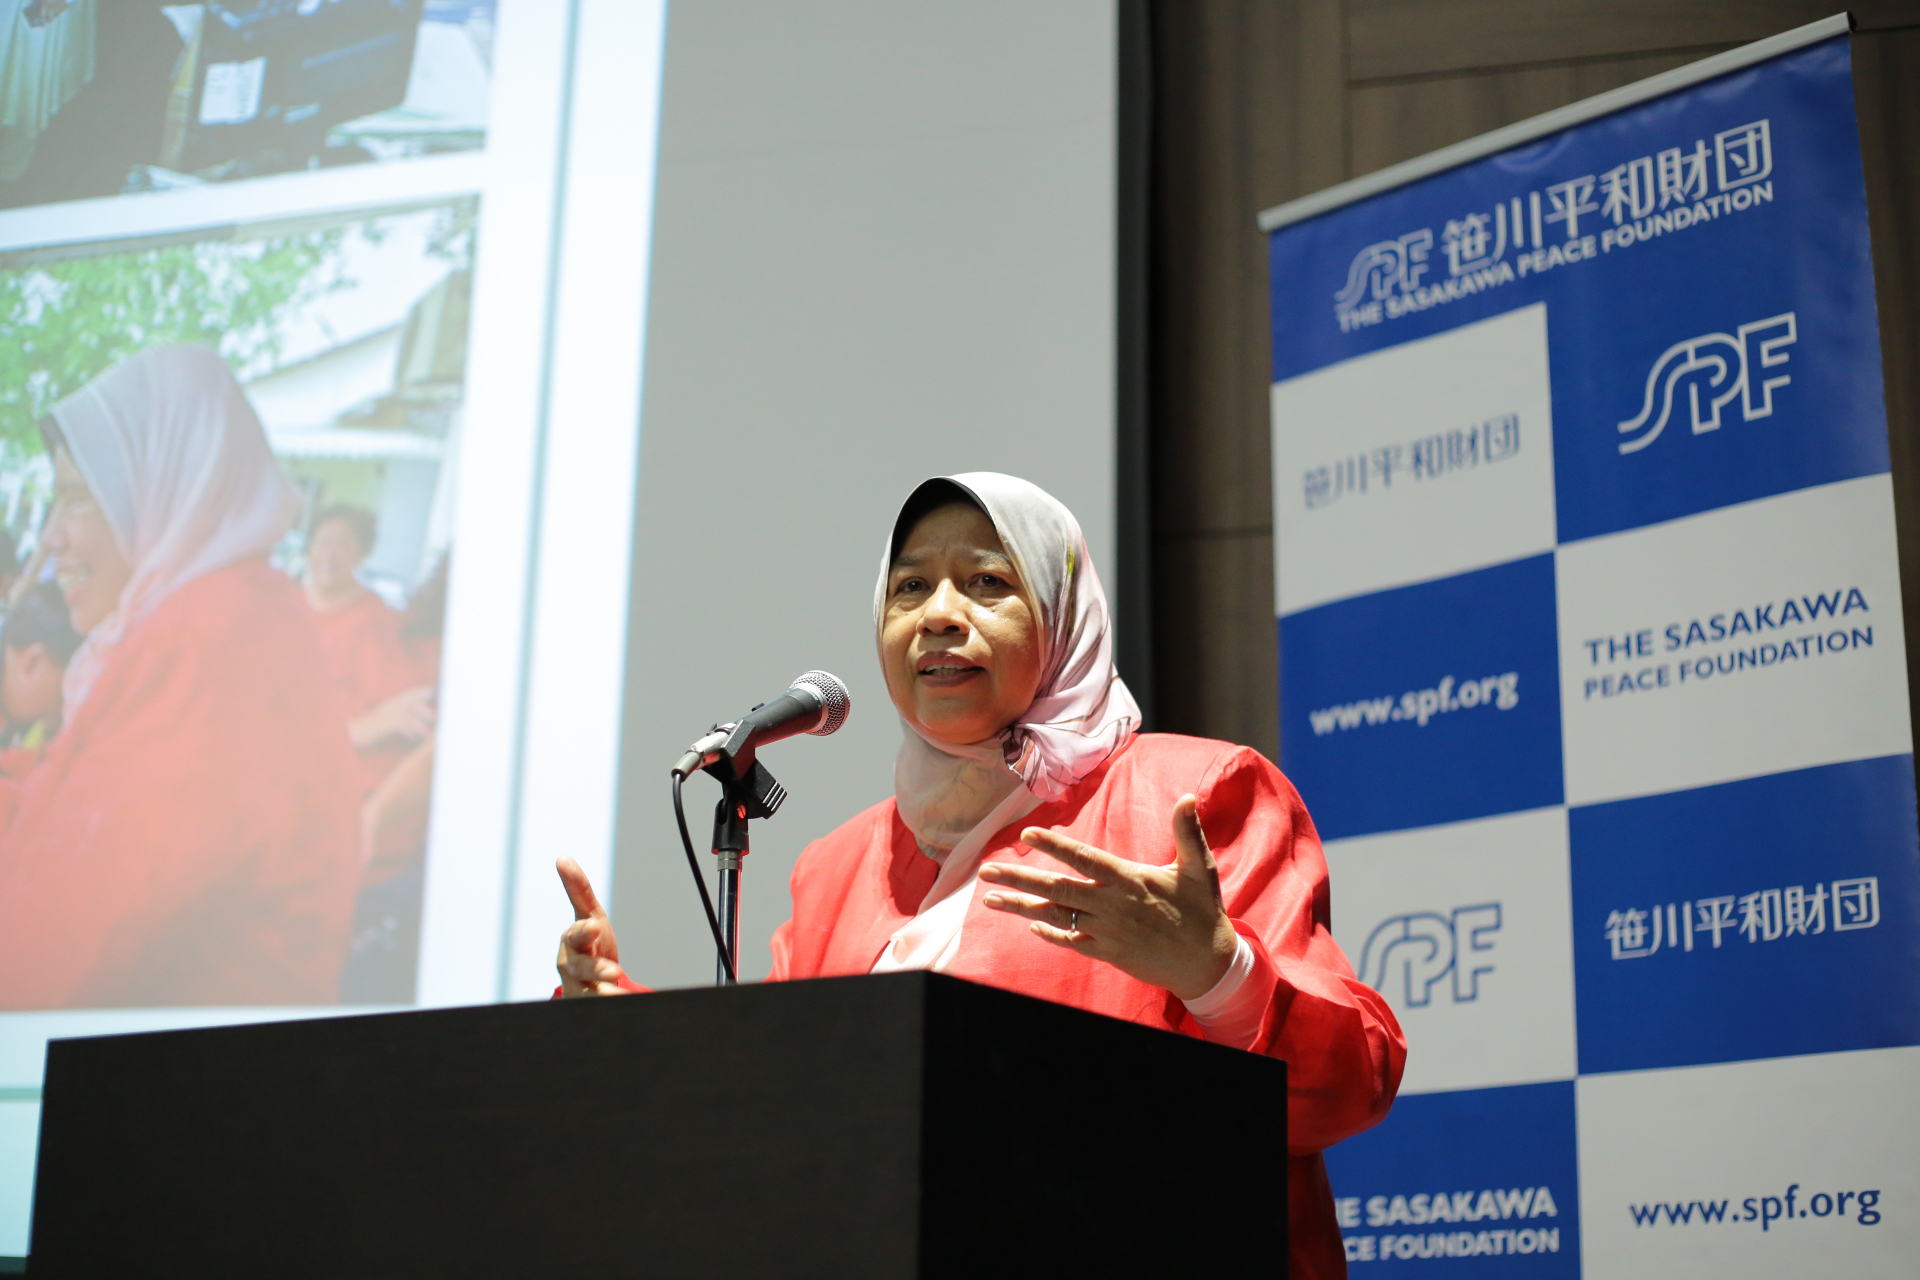 Malaysian Minister of Housing and Local Government Zuraida Kamaruddin discussing her political career